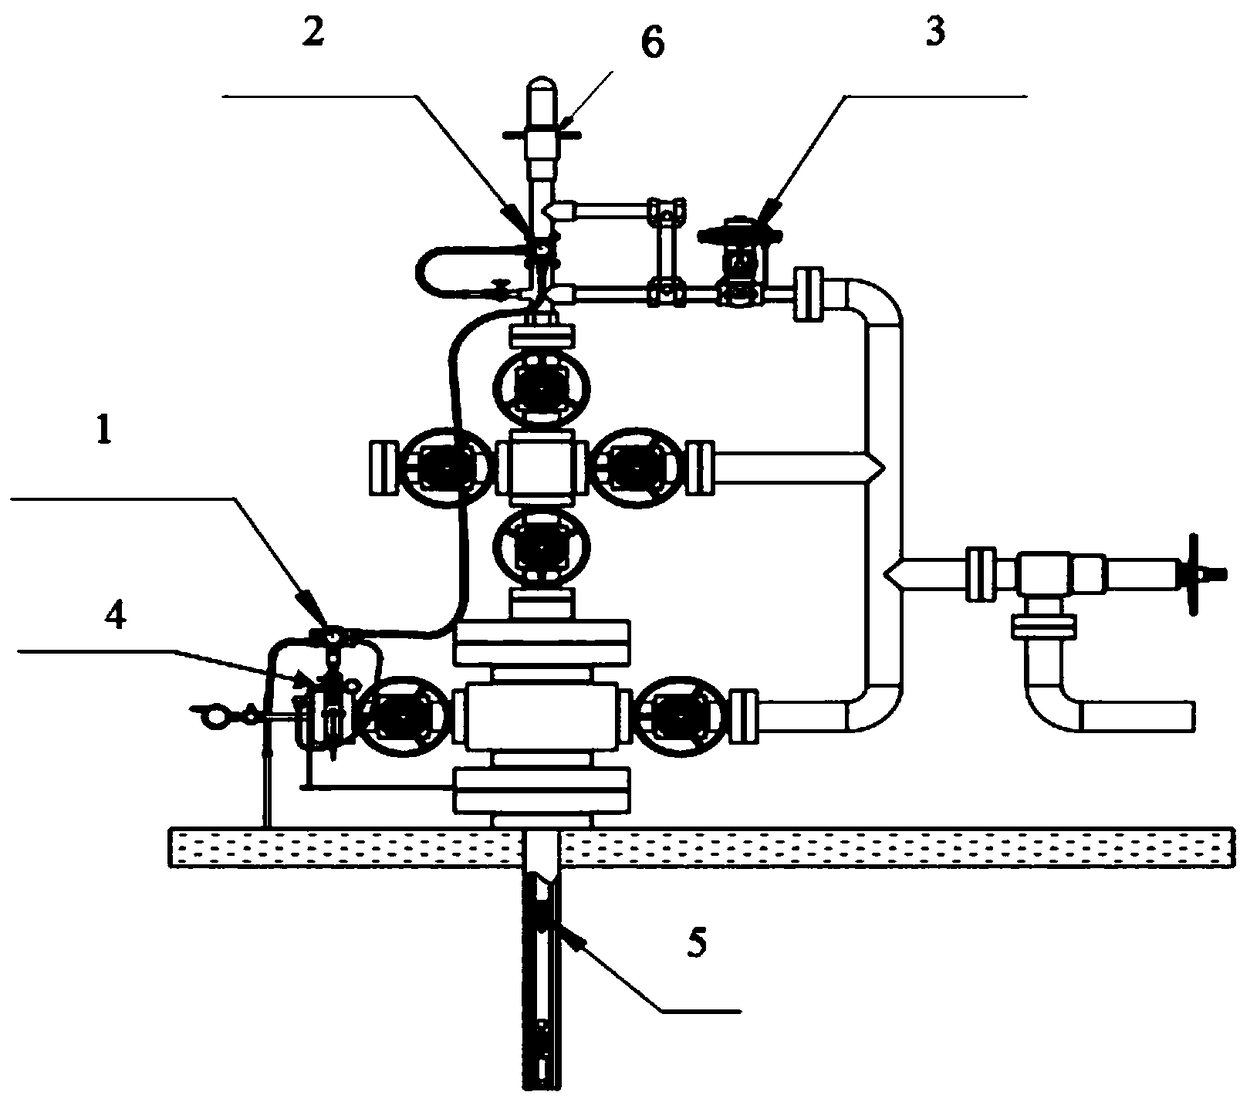 Plunger control system for well